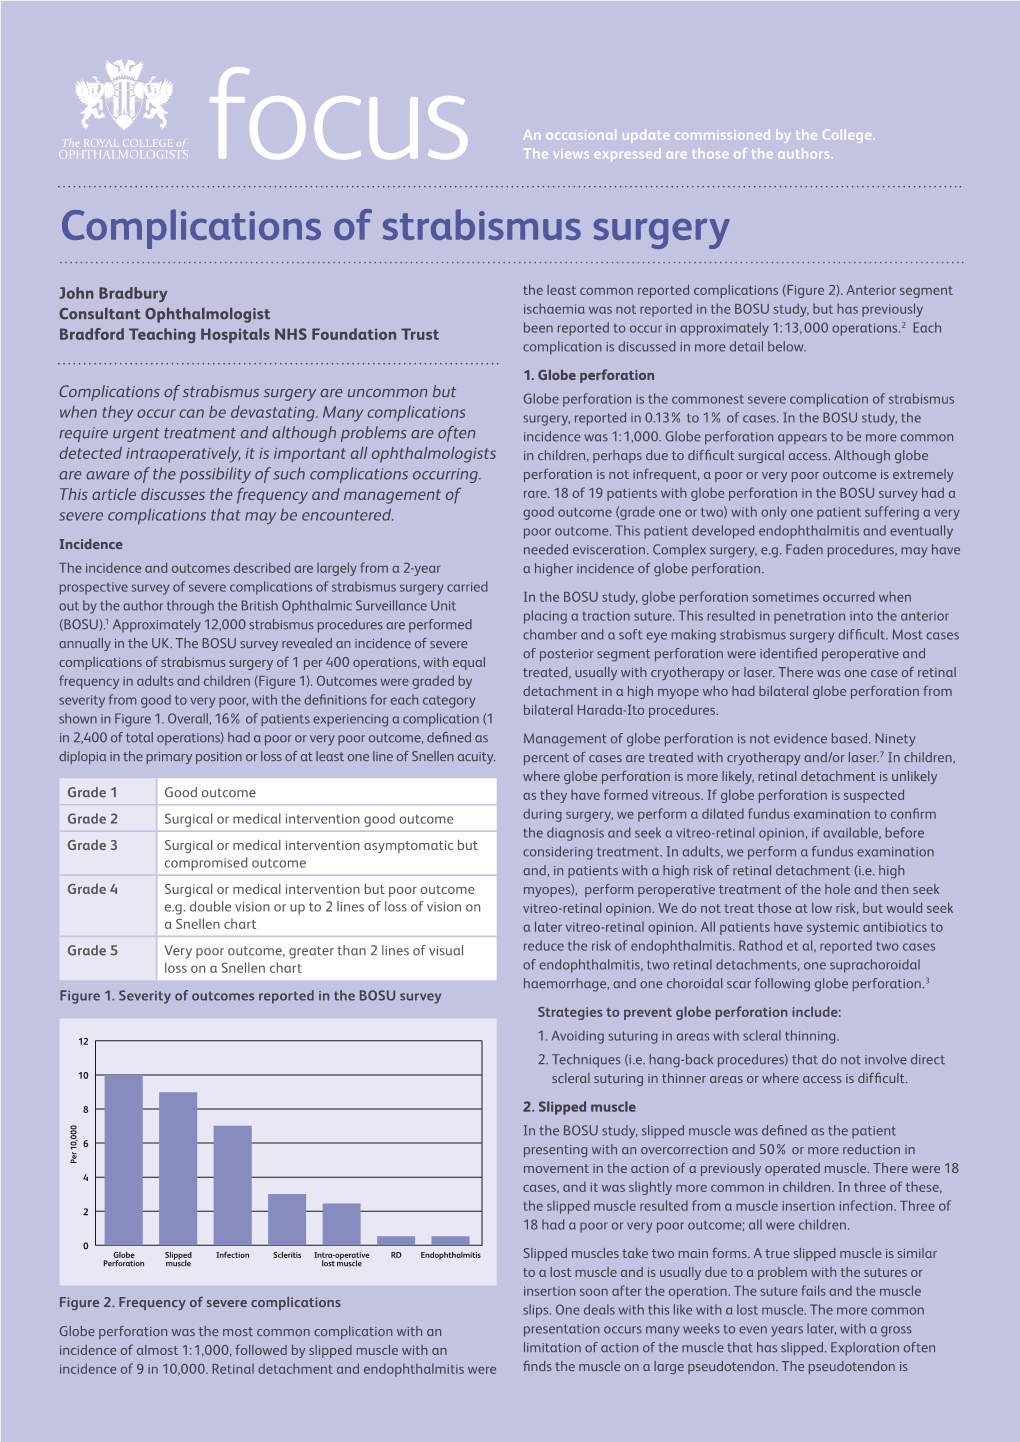 Complications of Strabismus Surgery